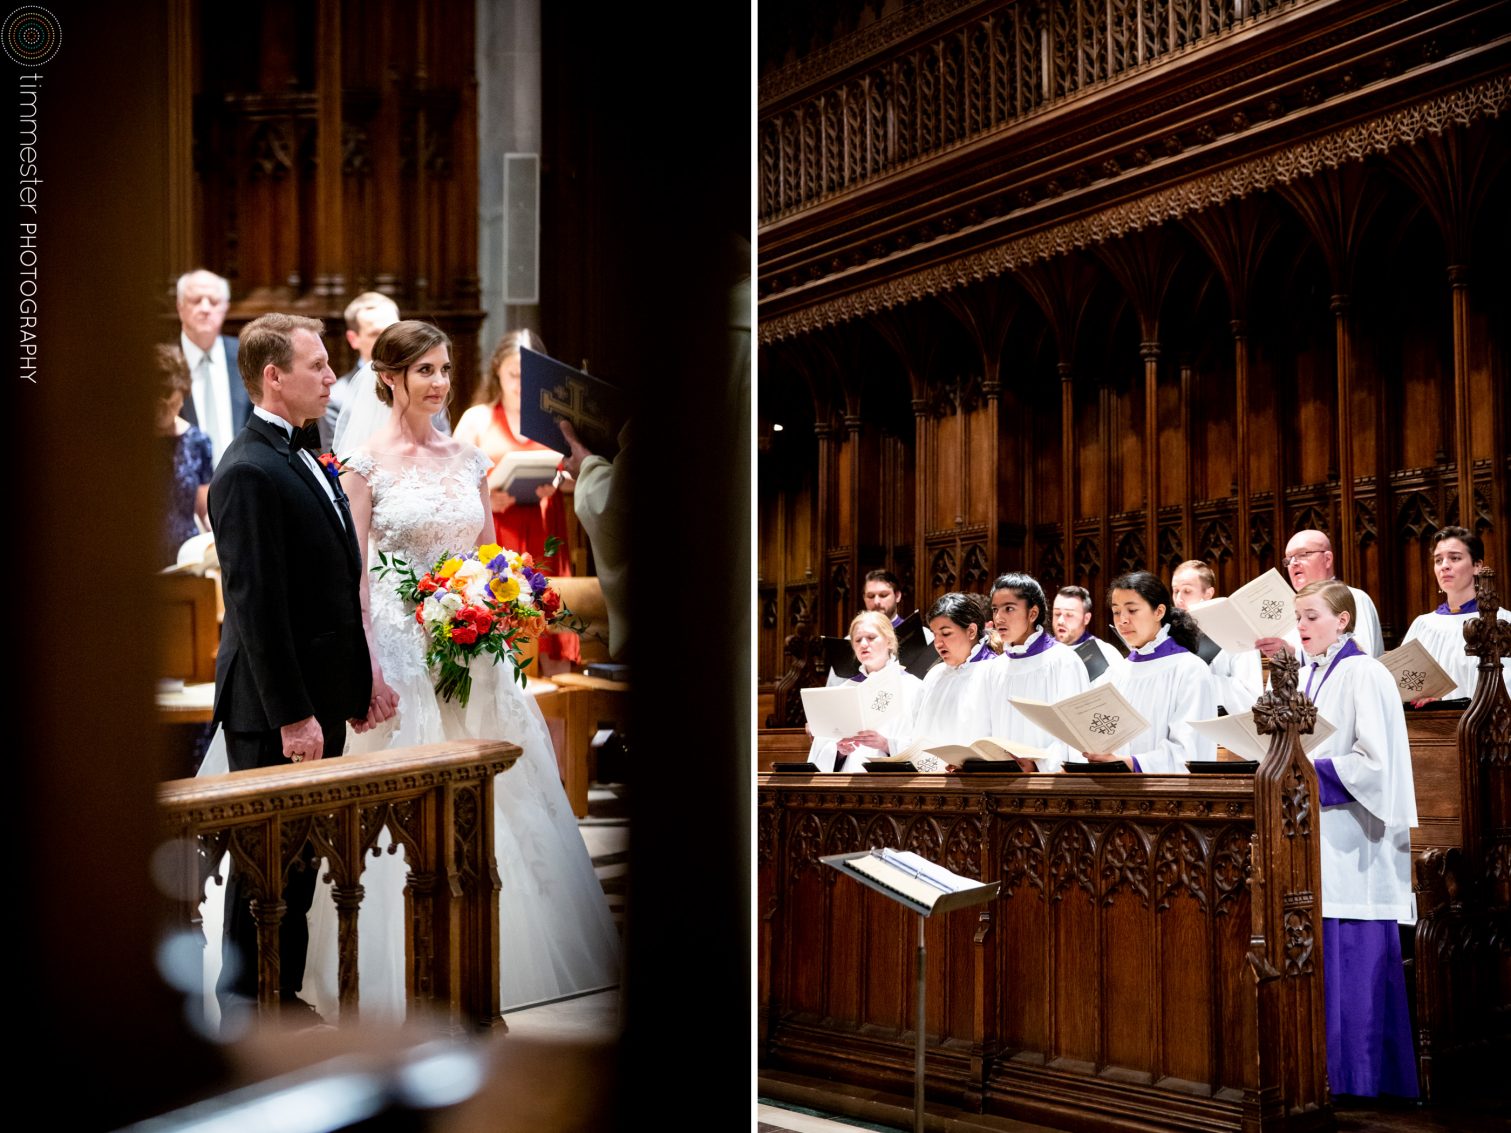 A bride and groom get married at the National Cathedral in Washington, DC.